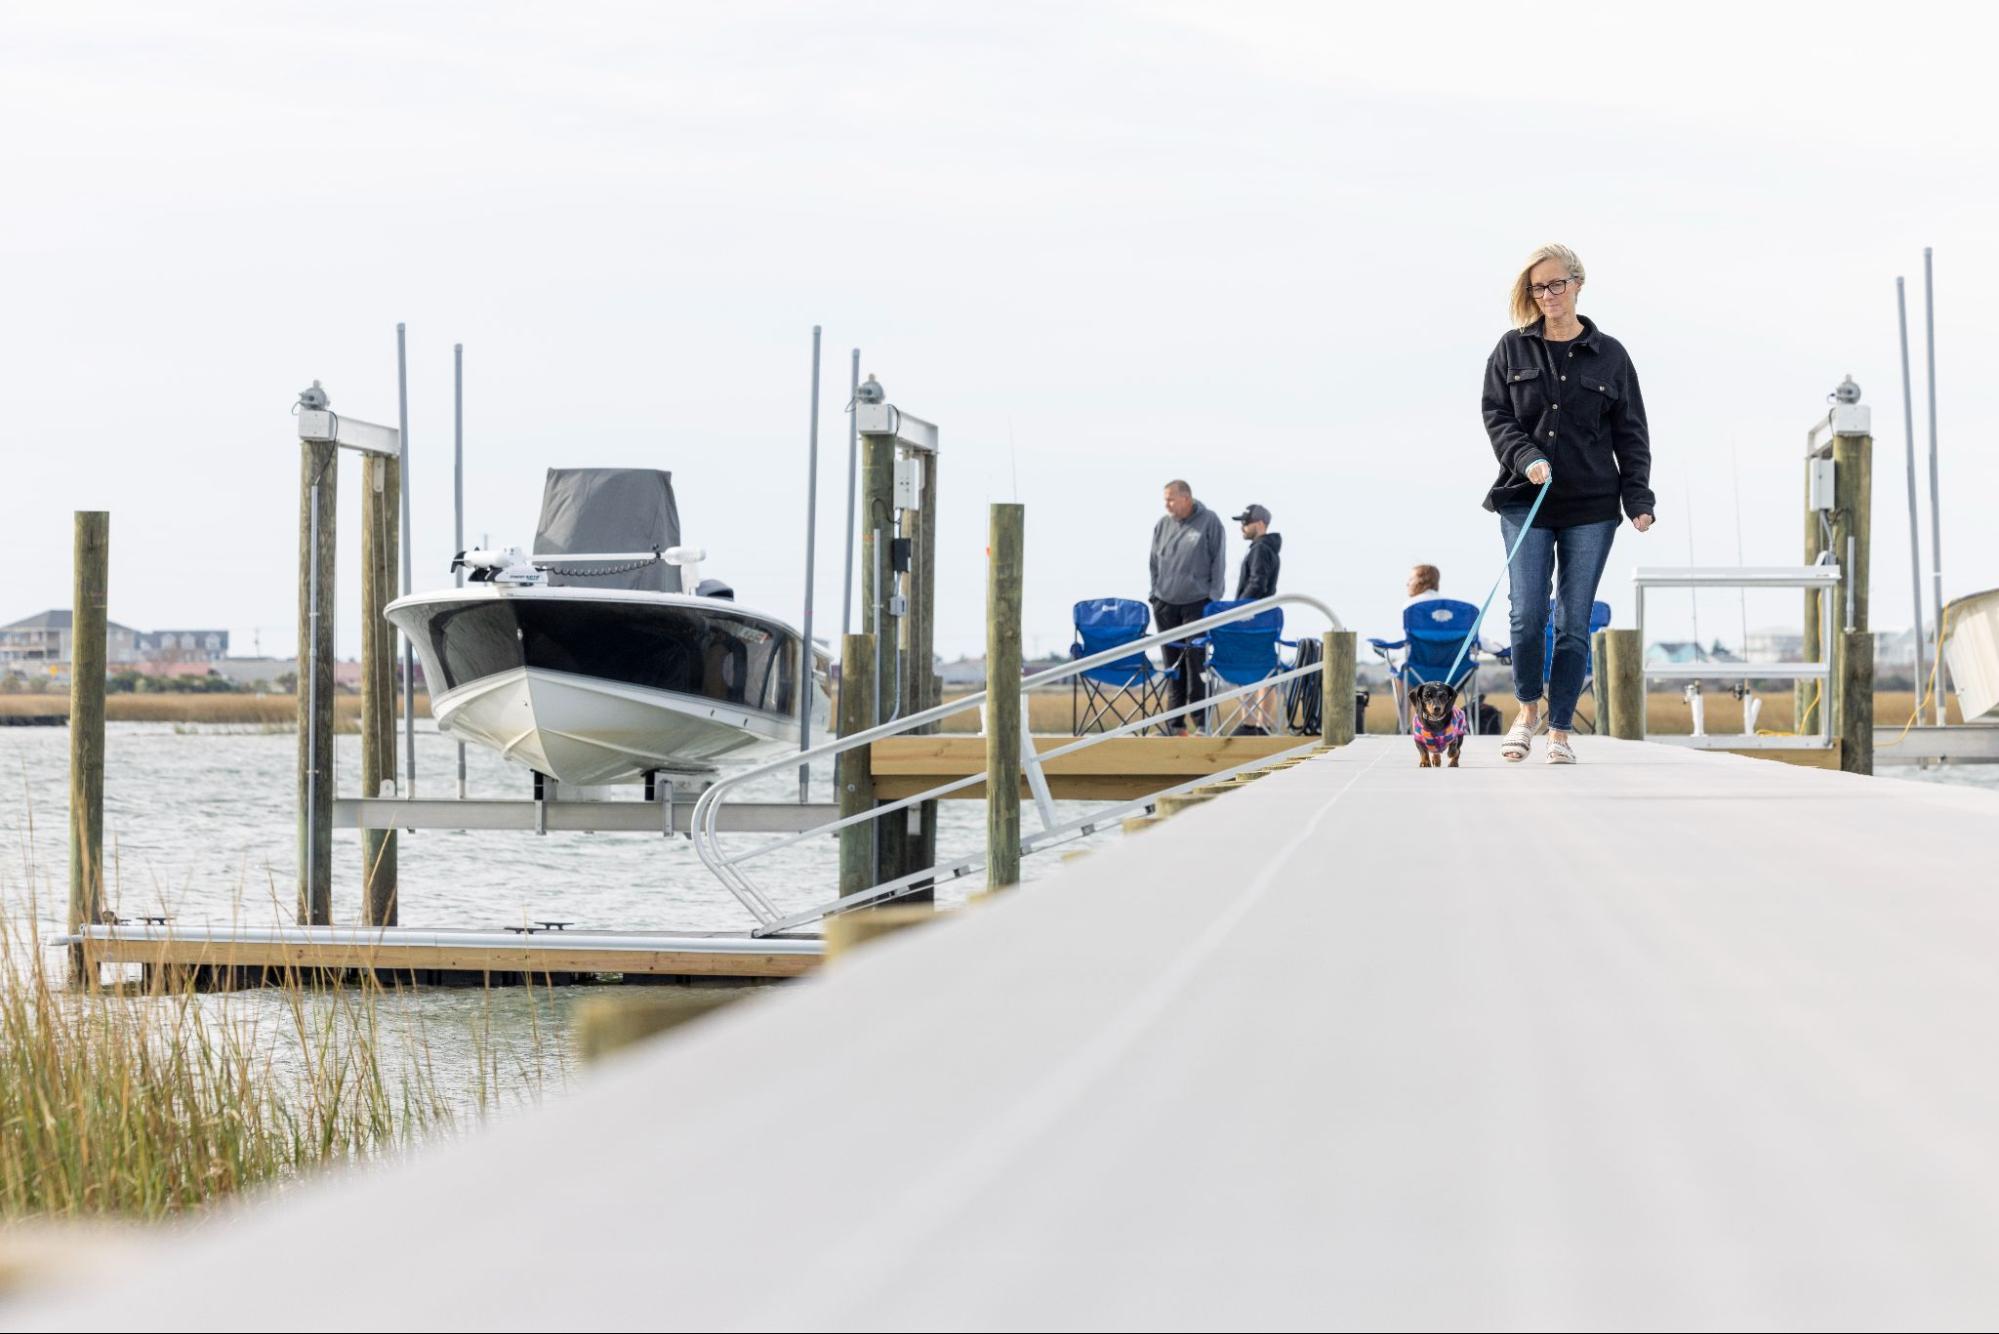 A woman walks her dog on her marine deck with Titan Decking marine deck material. On her right is a ramp leading down to the water with accessibility rails.